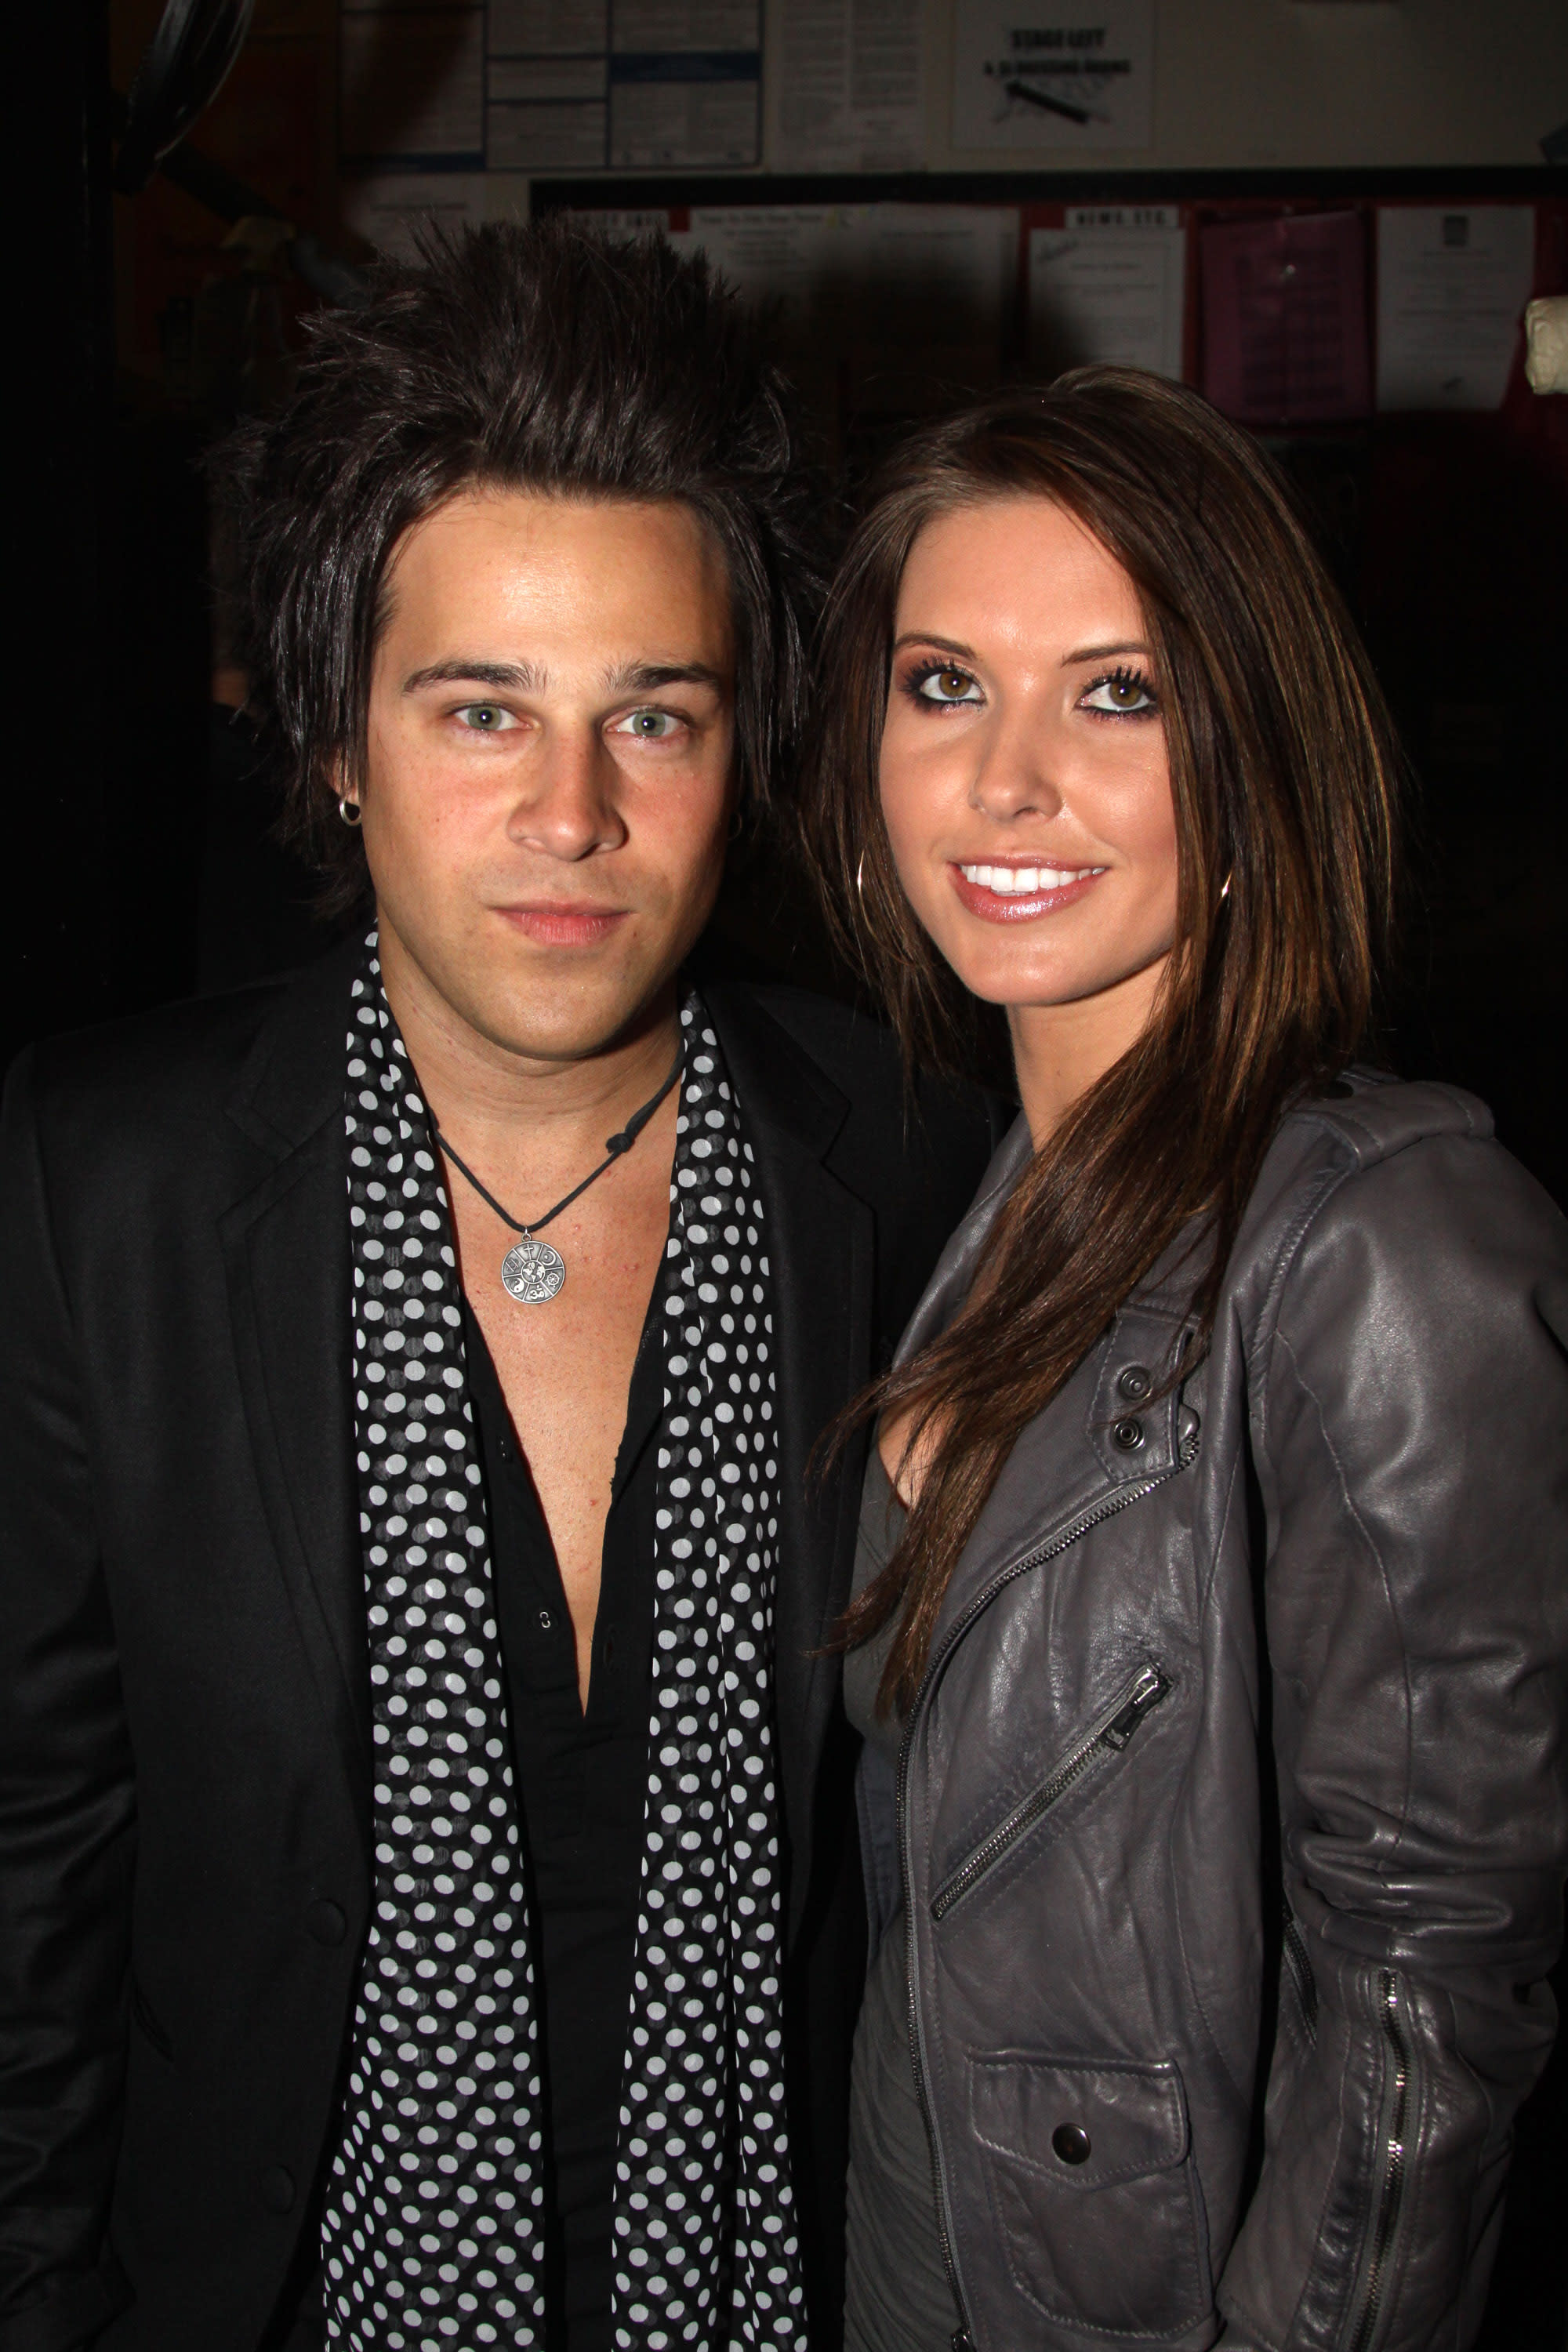 Exes Audrina Patridge and Ryan Cabrera take their back-on romance to Stagecoach [Video]